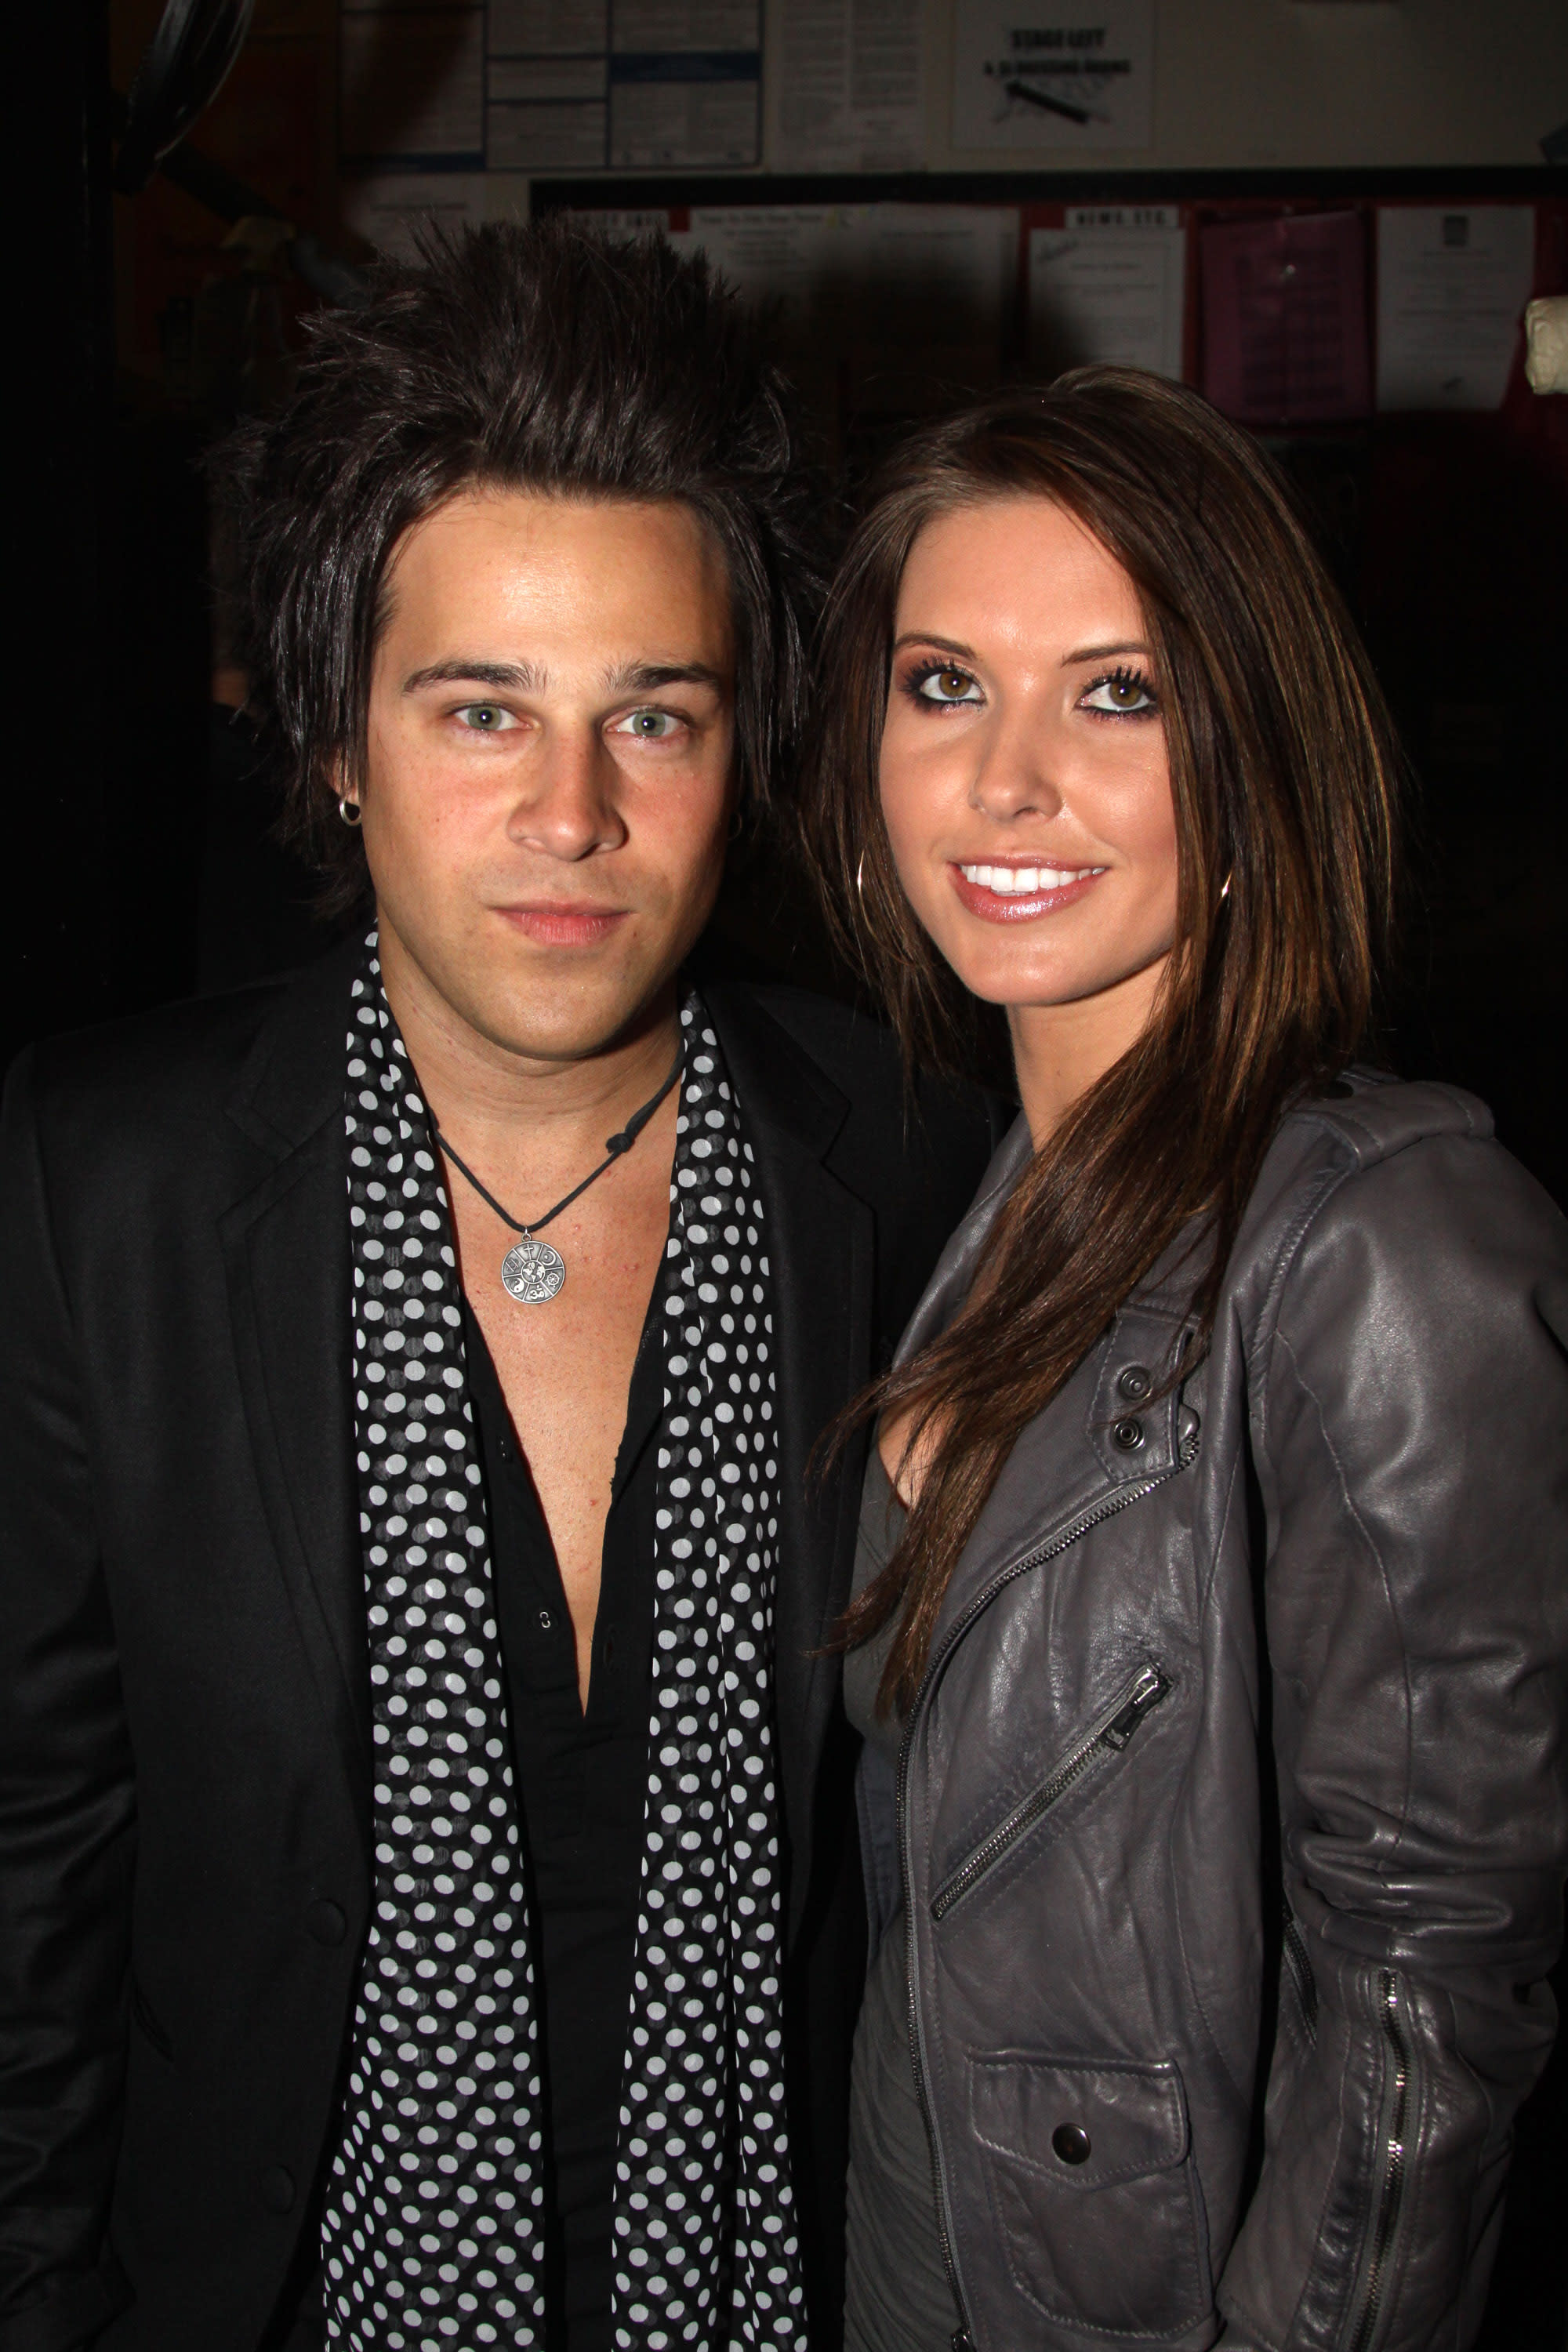 Exes Audrina Patridge and Ryan Cabrera take their back-on romance to Stagecoach [Video]